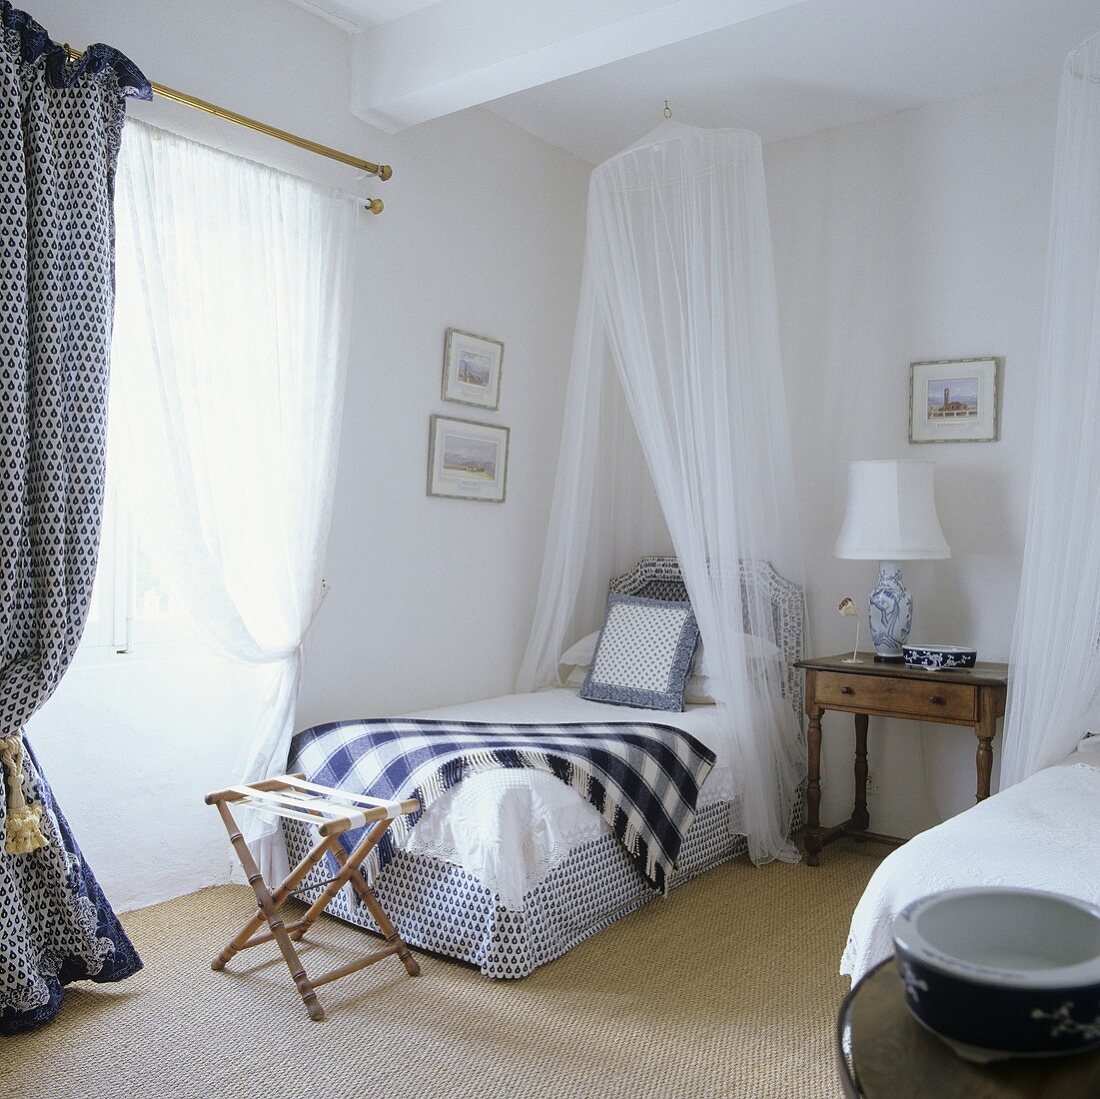 A single bed with a canopy and a stool in a bedroom in a Provençal country house